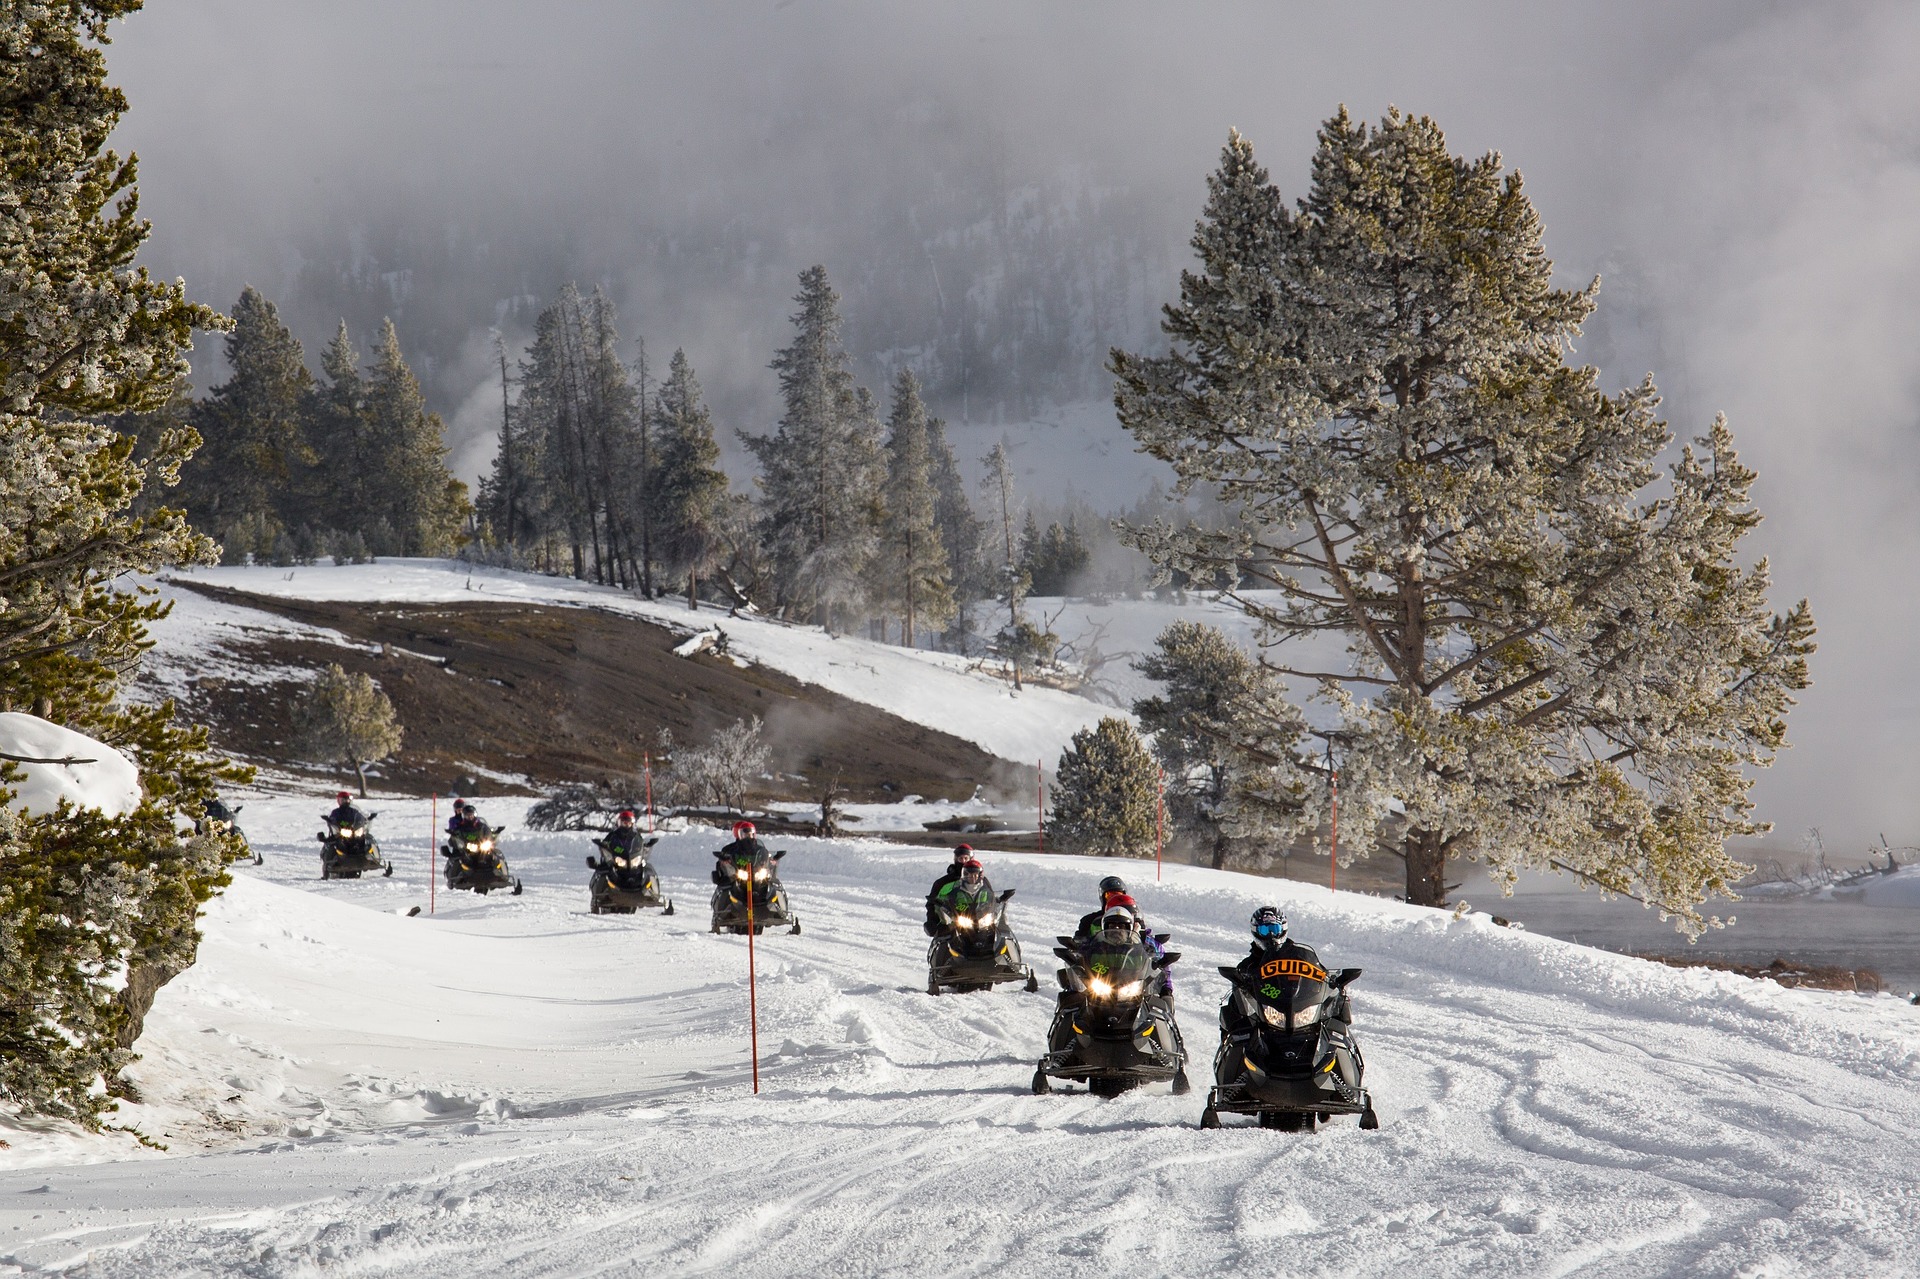 Latest snowmobile trail conditions available at OFSC Interactive Trail Guid...